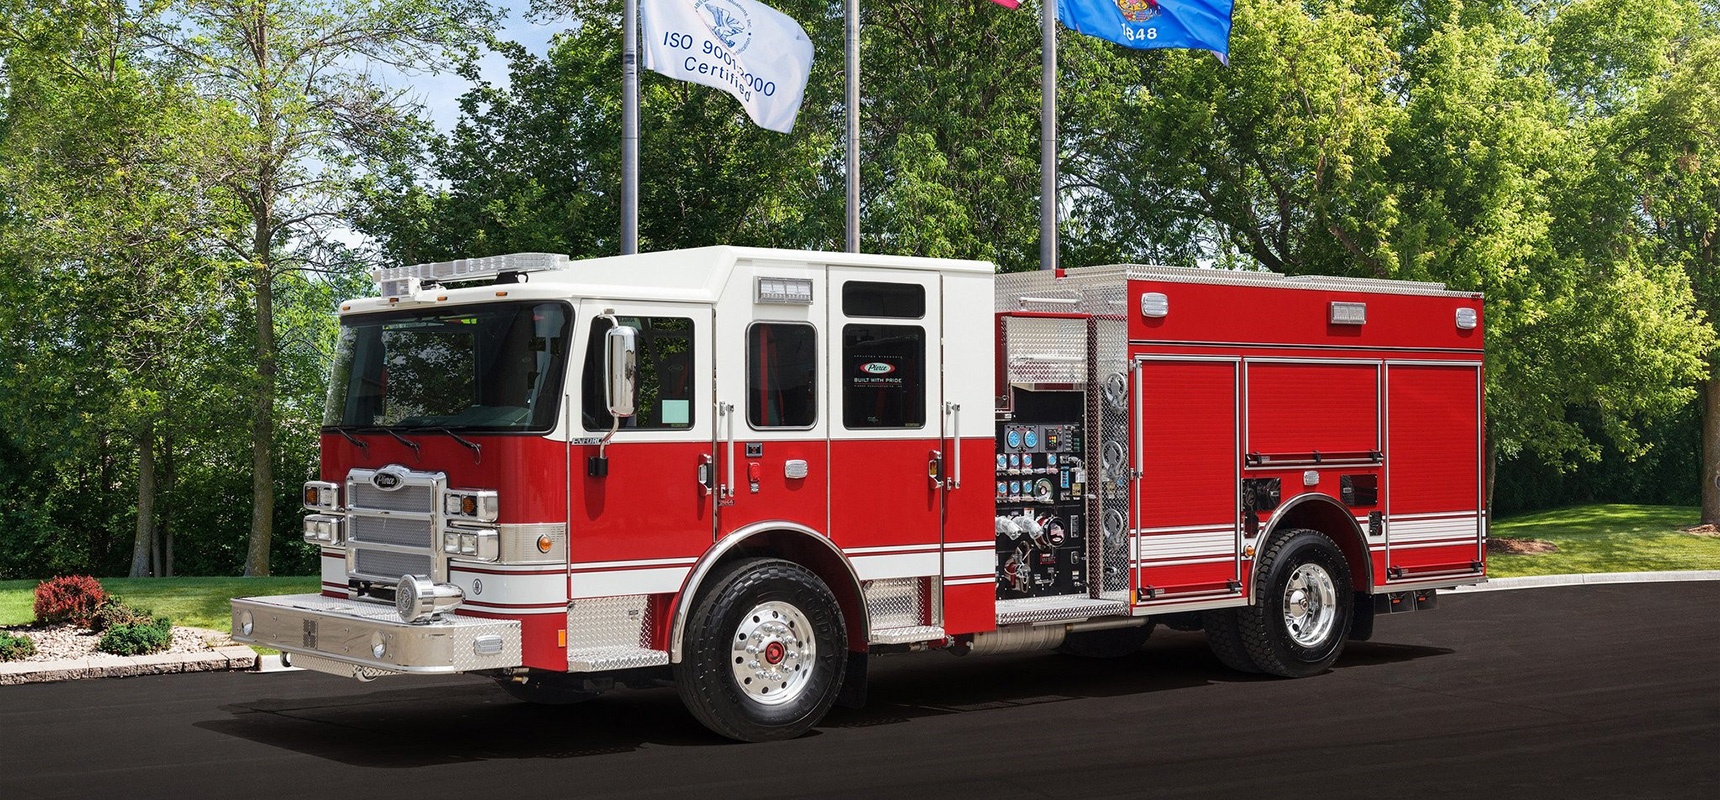 South-Carolina-Horry-County-Fire-Rescue-Purchases-Nine-Pierce-Enforcer-Apparatus_Header.jpg